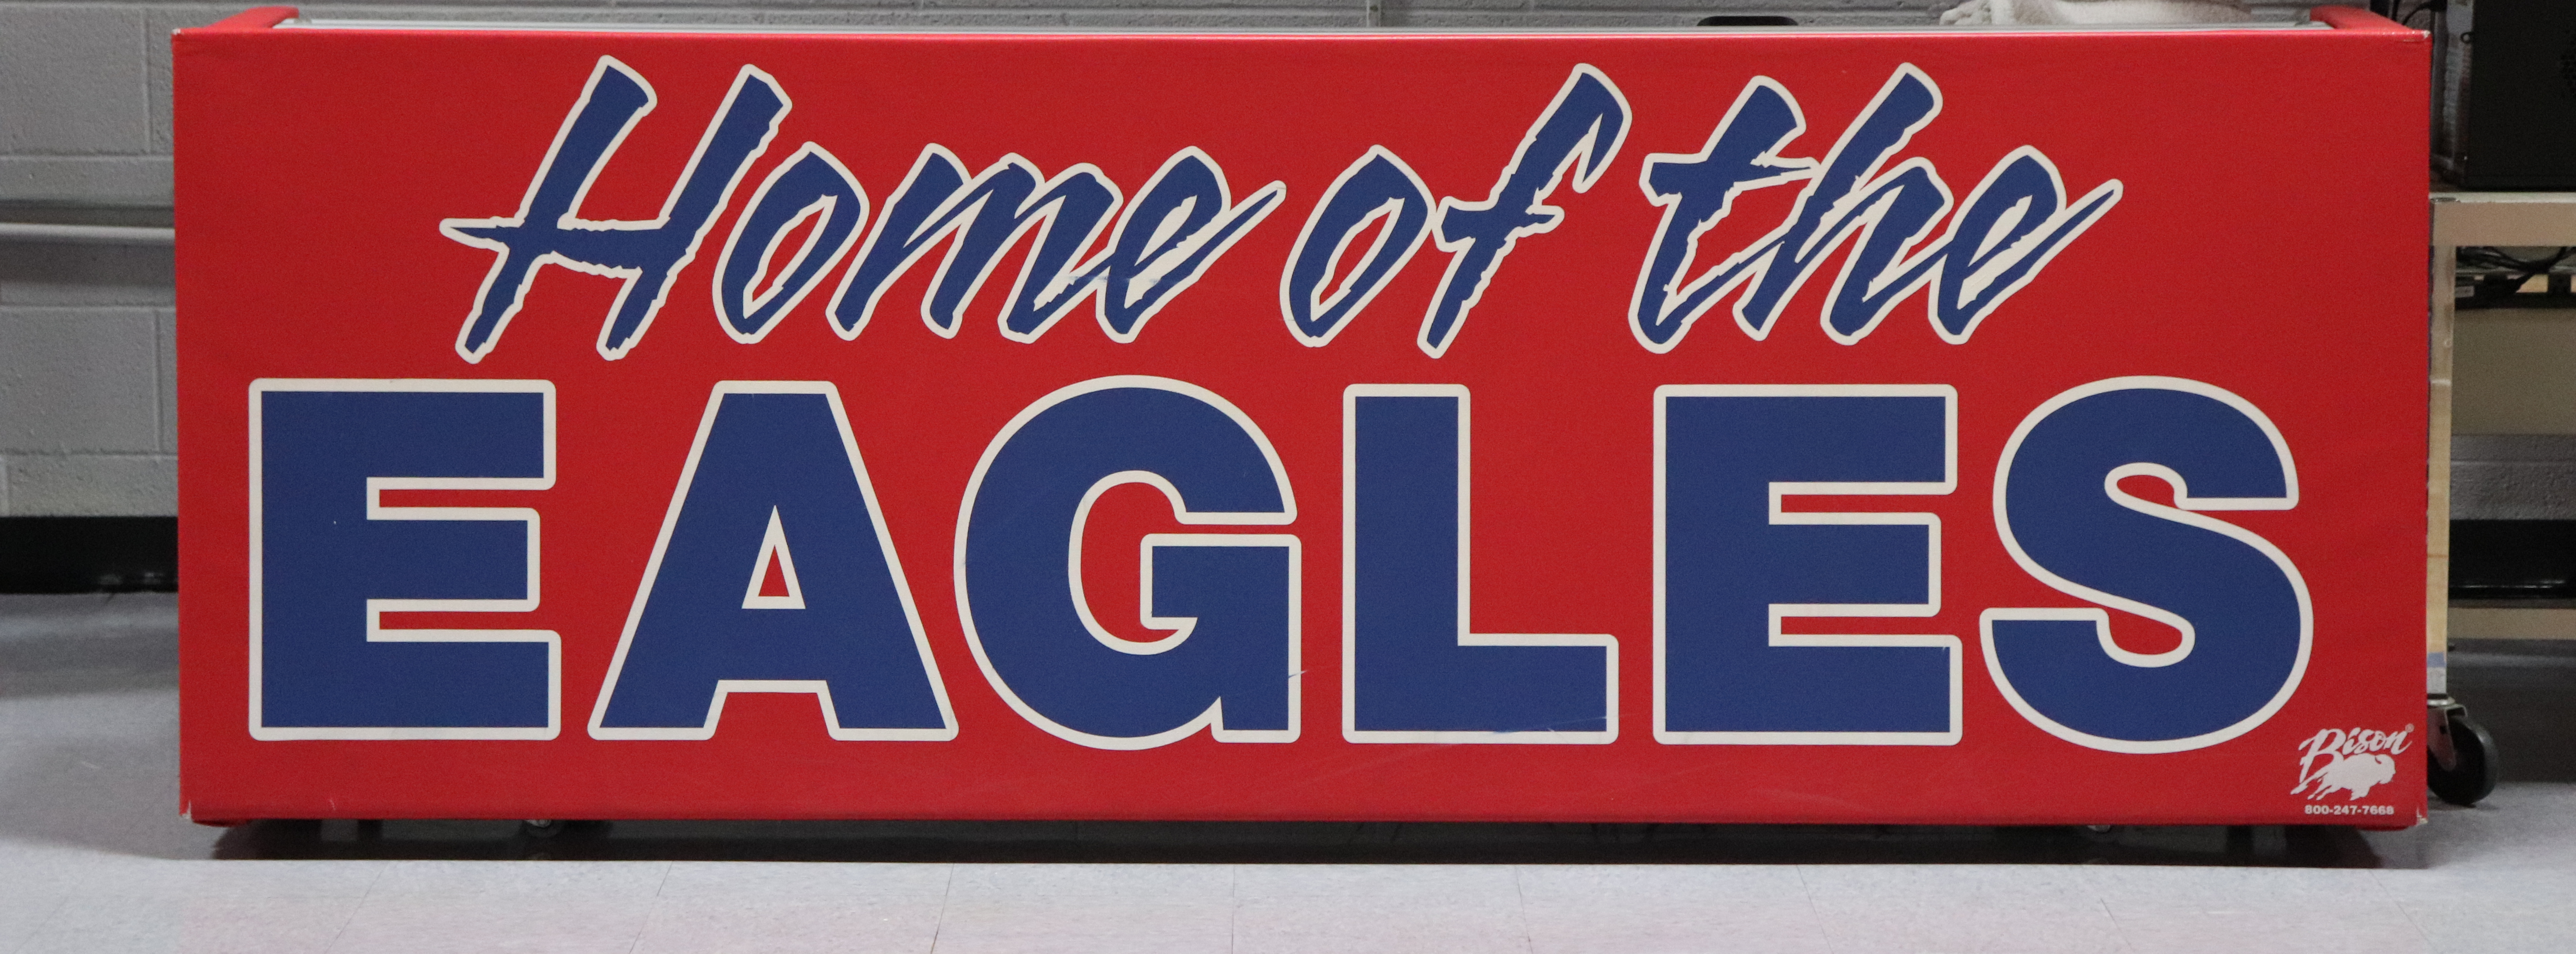 ScoreTable image, text Home of the Eagles